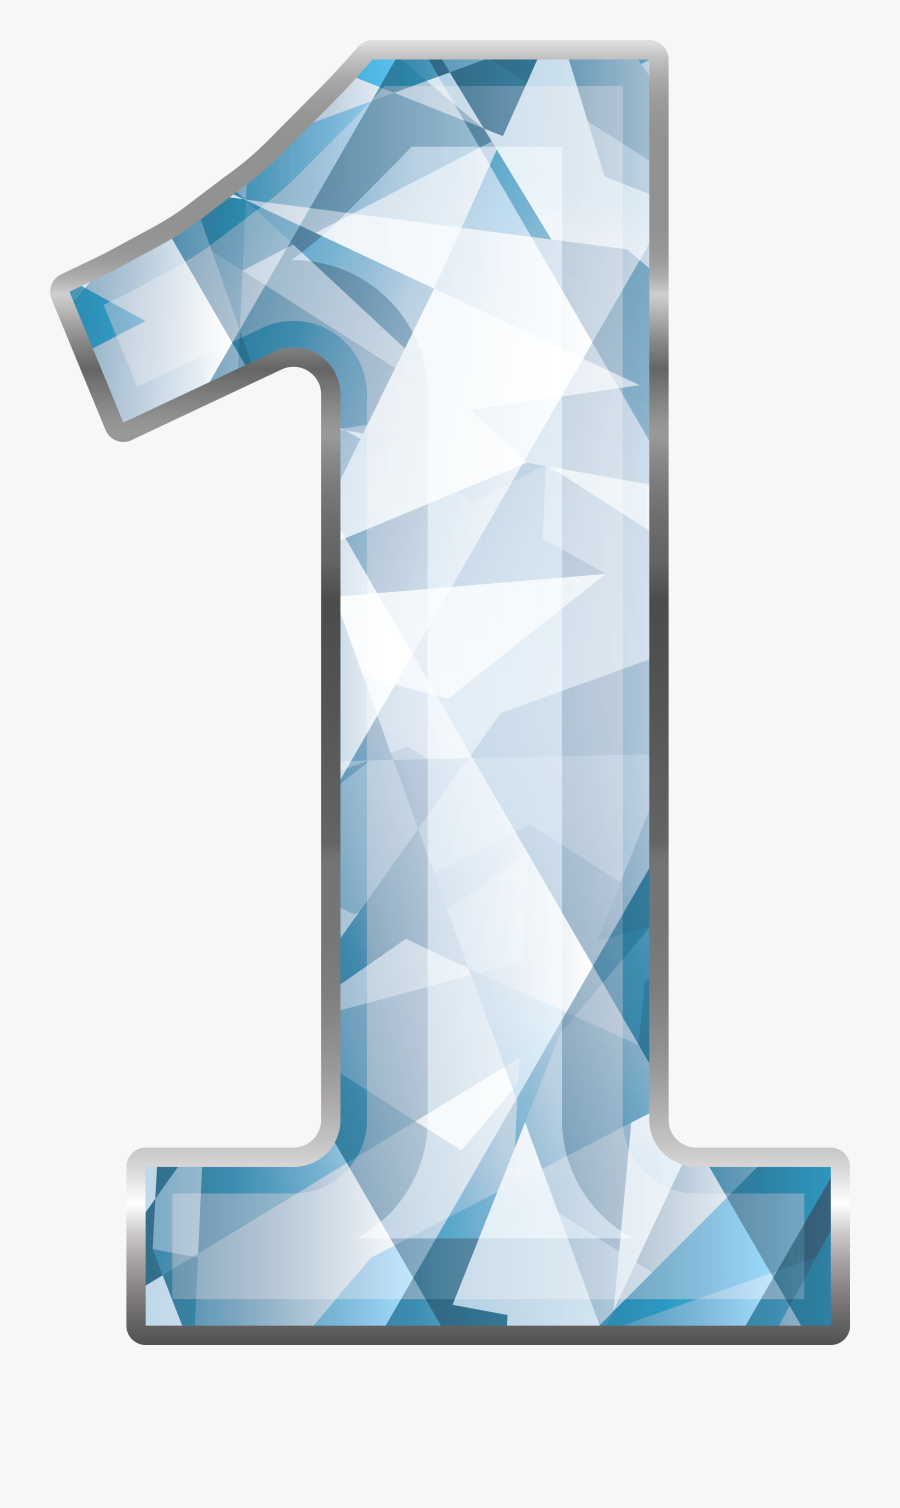 Crystal One Png Image - Crystal Numbers Png, Transparent Clipart